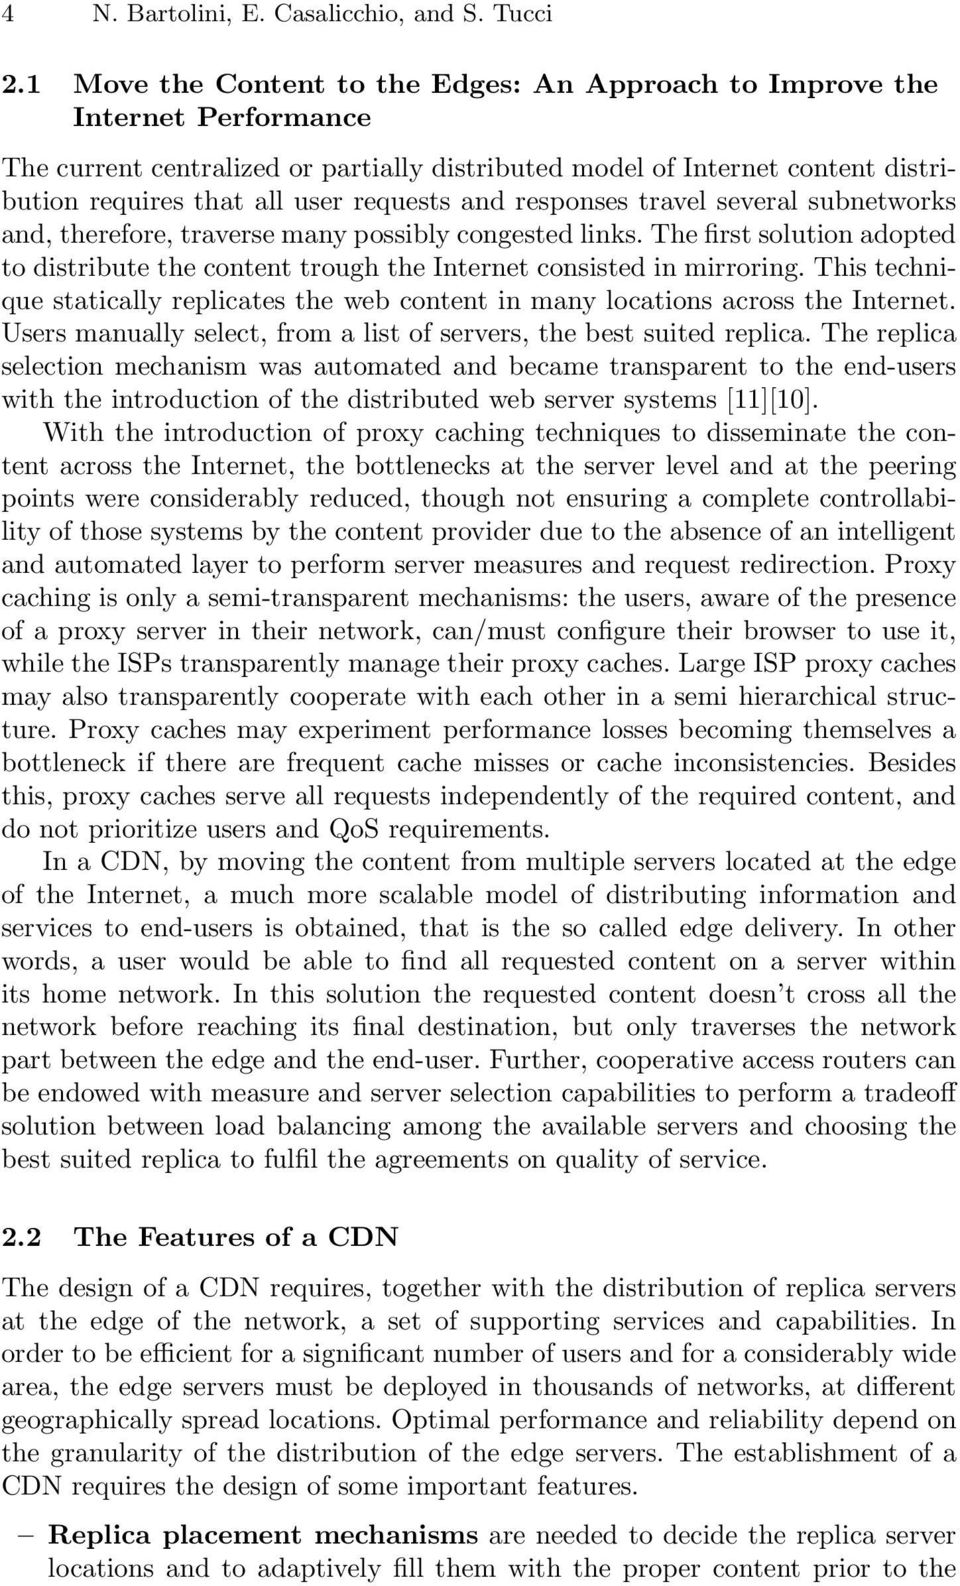 requests and responses travel several subnetworks and, therefore, traverse many possibly congested links.